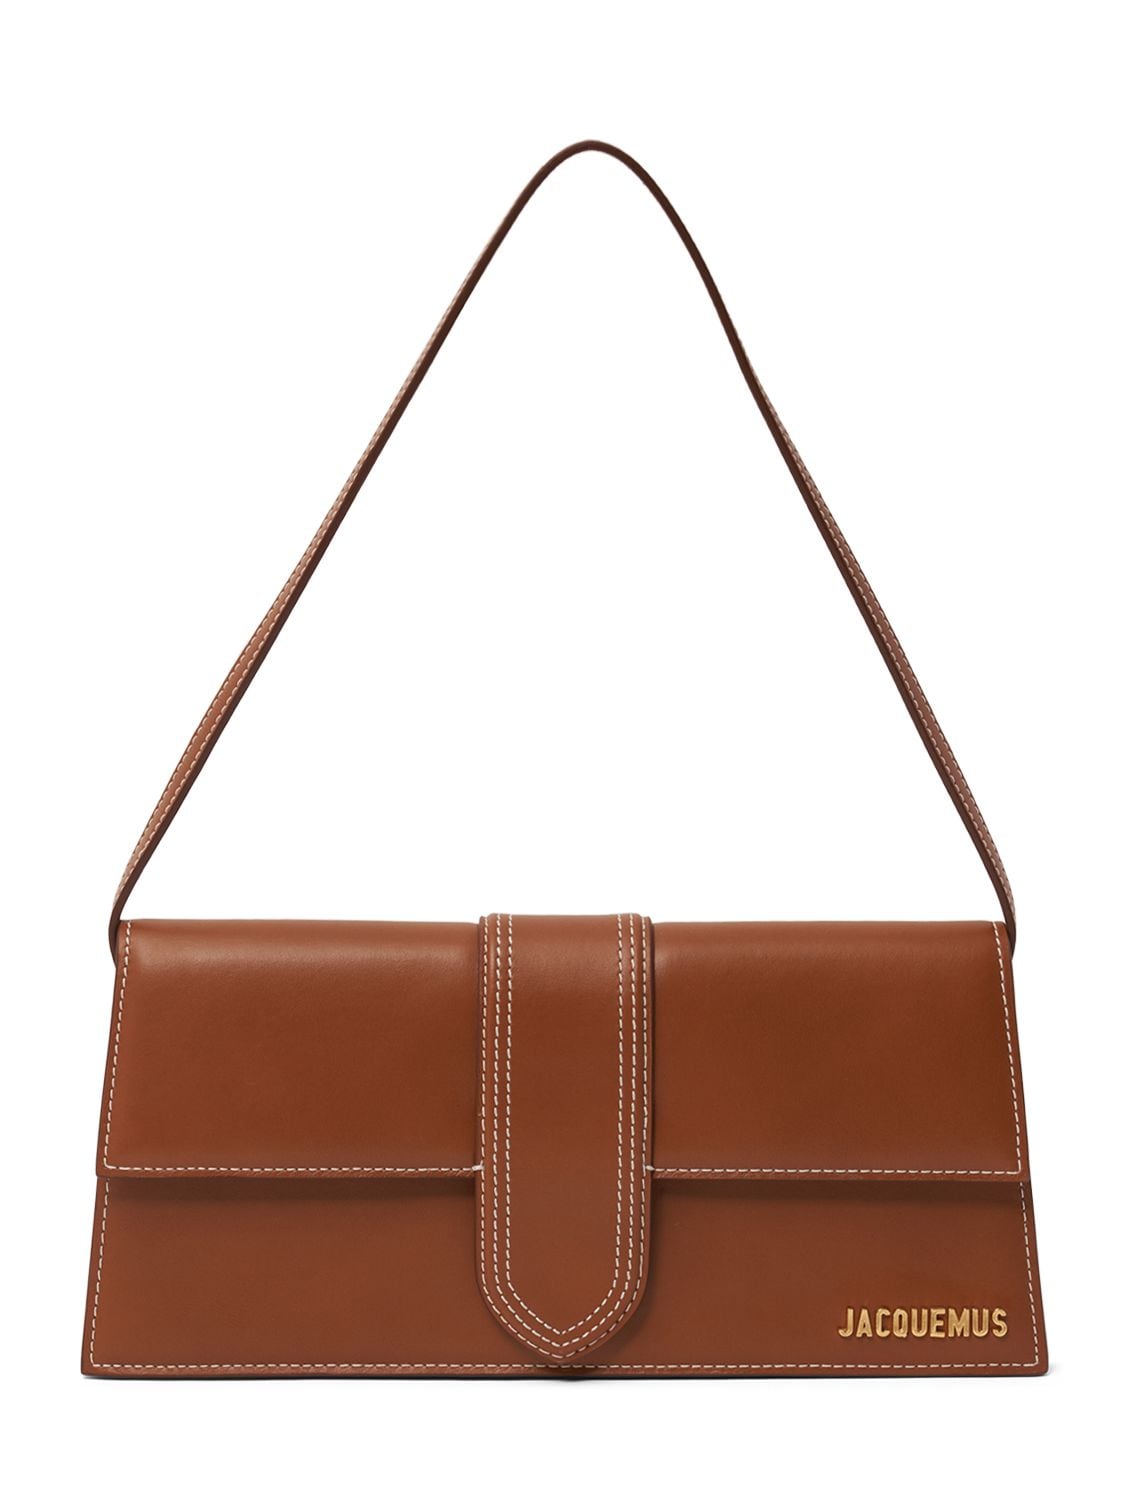 Jacquemus Le Bambino Long Leather Shoulder Bag In Light Brown